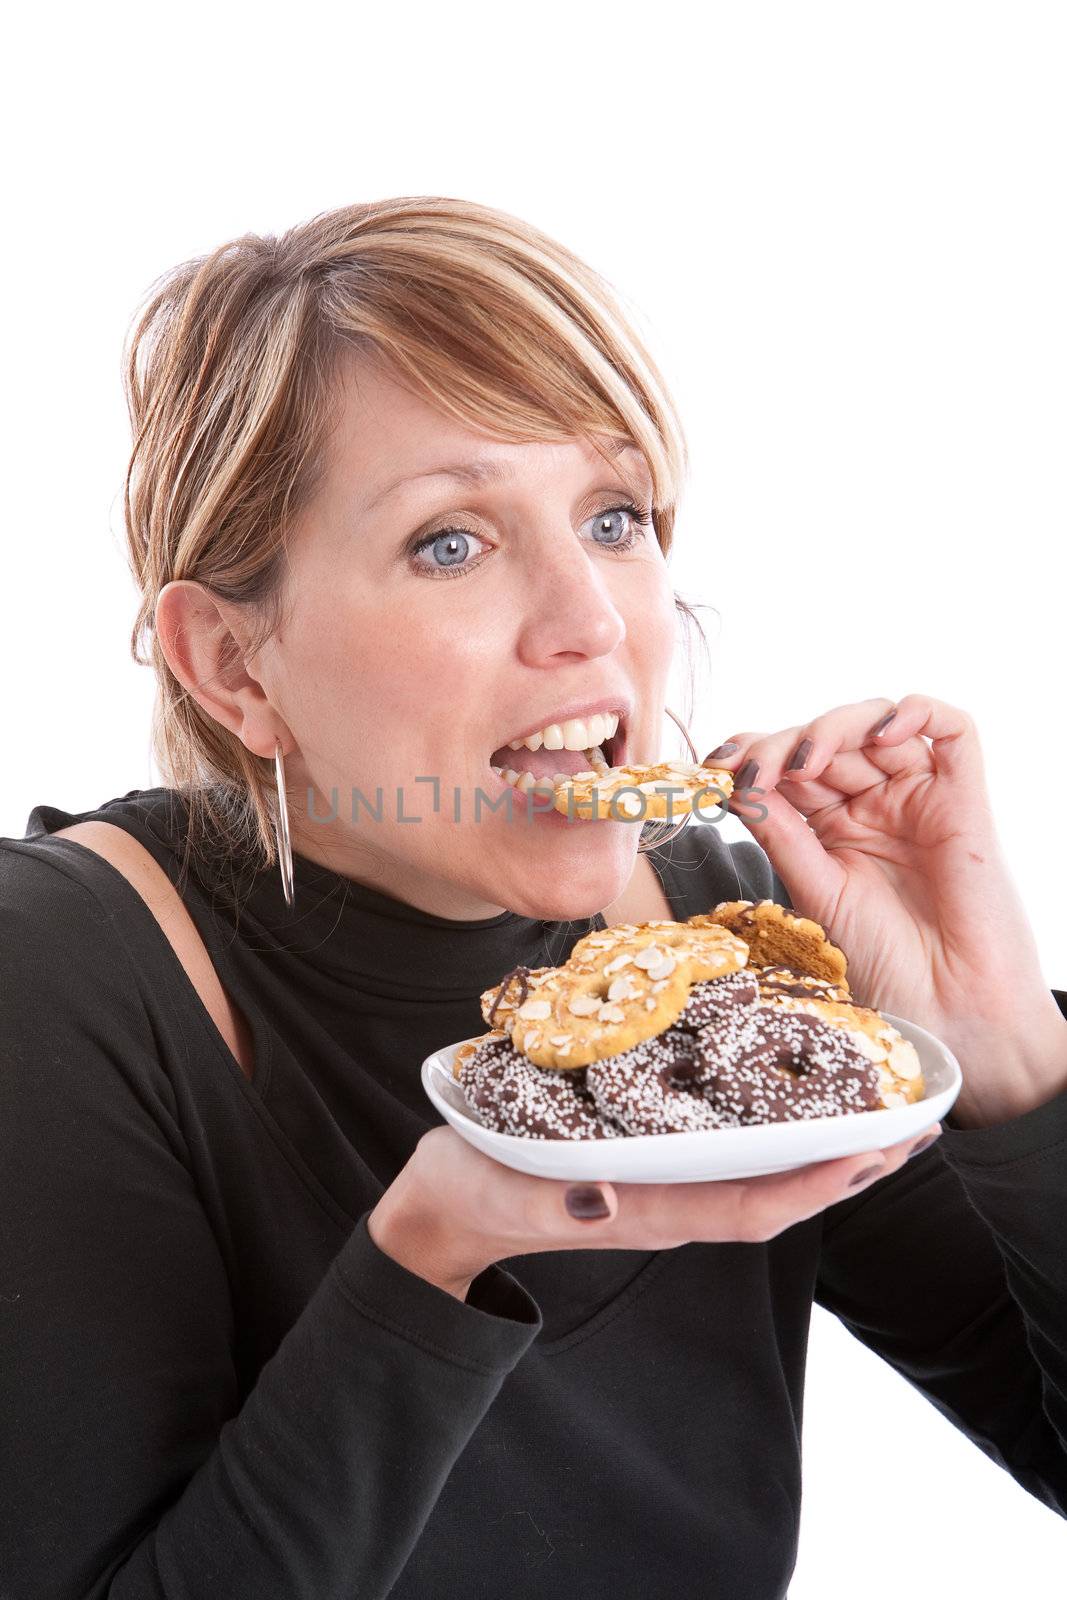 Pretty blond girl taking a bite out of a cookie